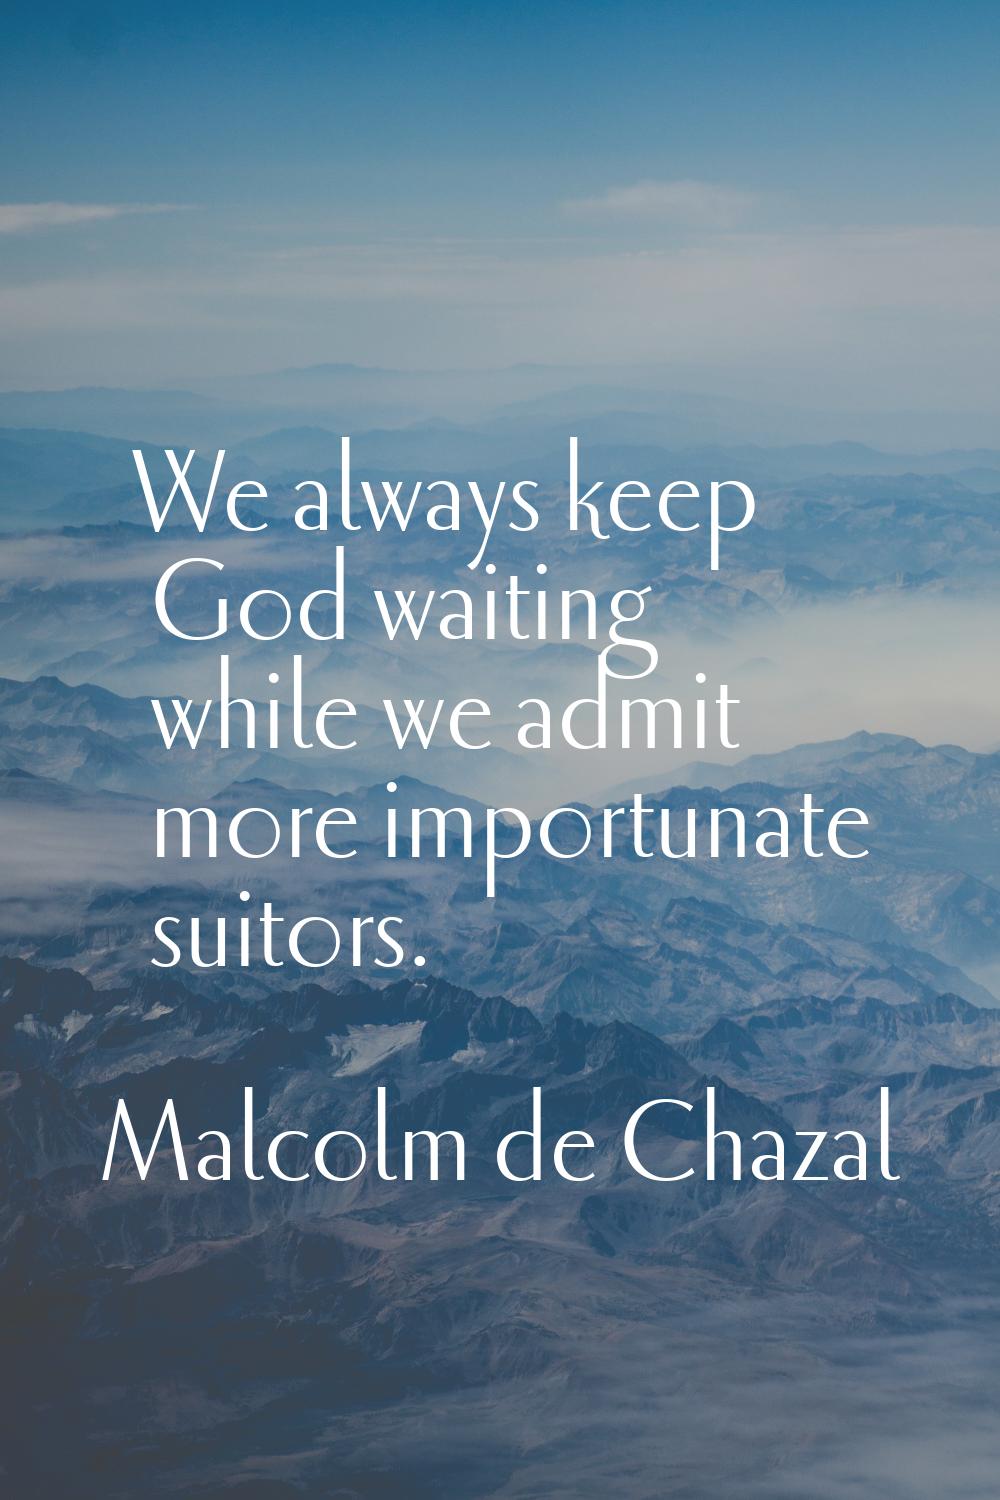 We always keep God waiting while we admit more importunate suitors.